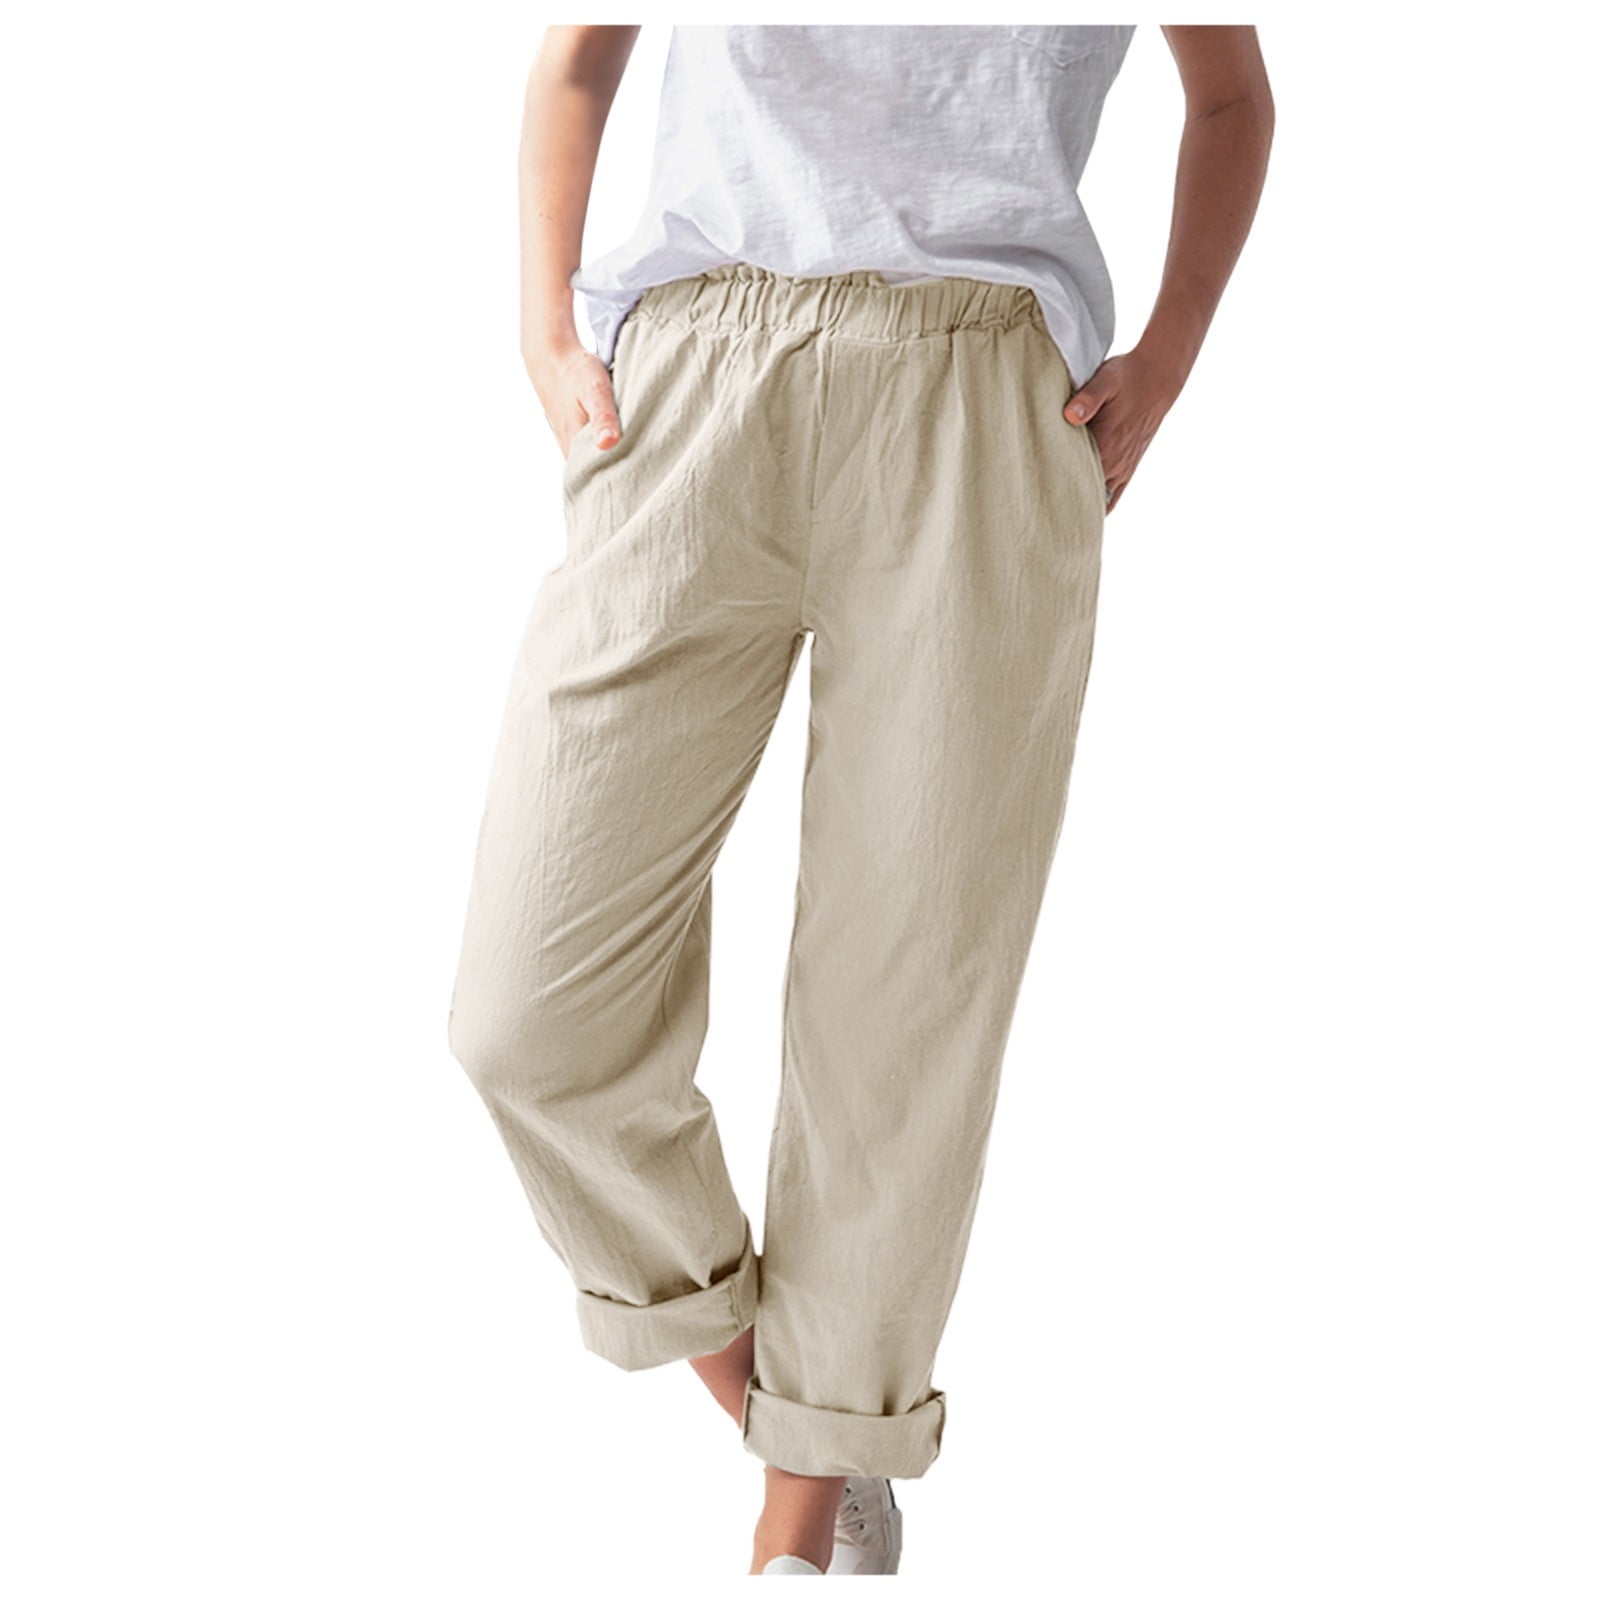 Xinqinghao Lounge Pants Women With Pockets Cotton And Linen Pants